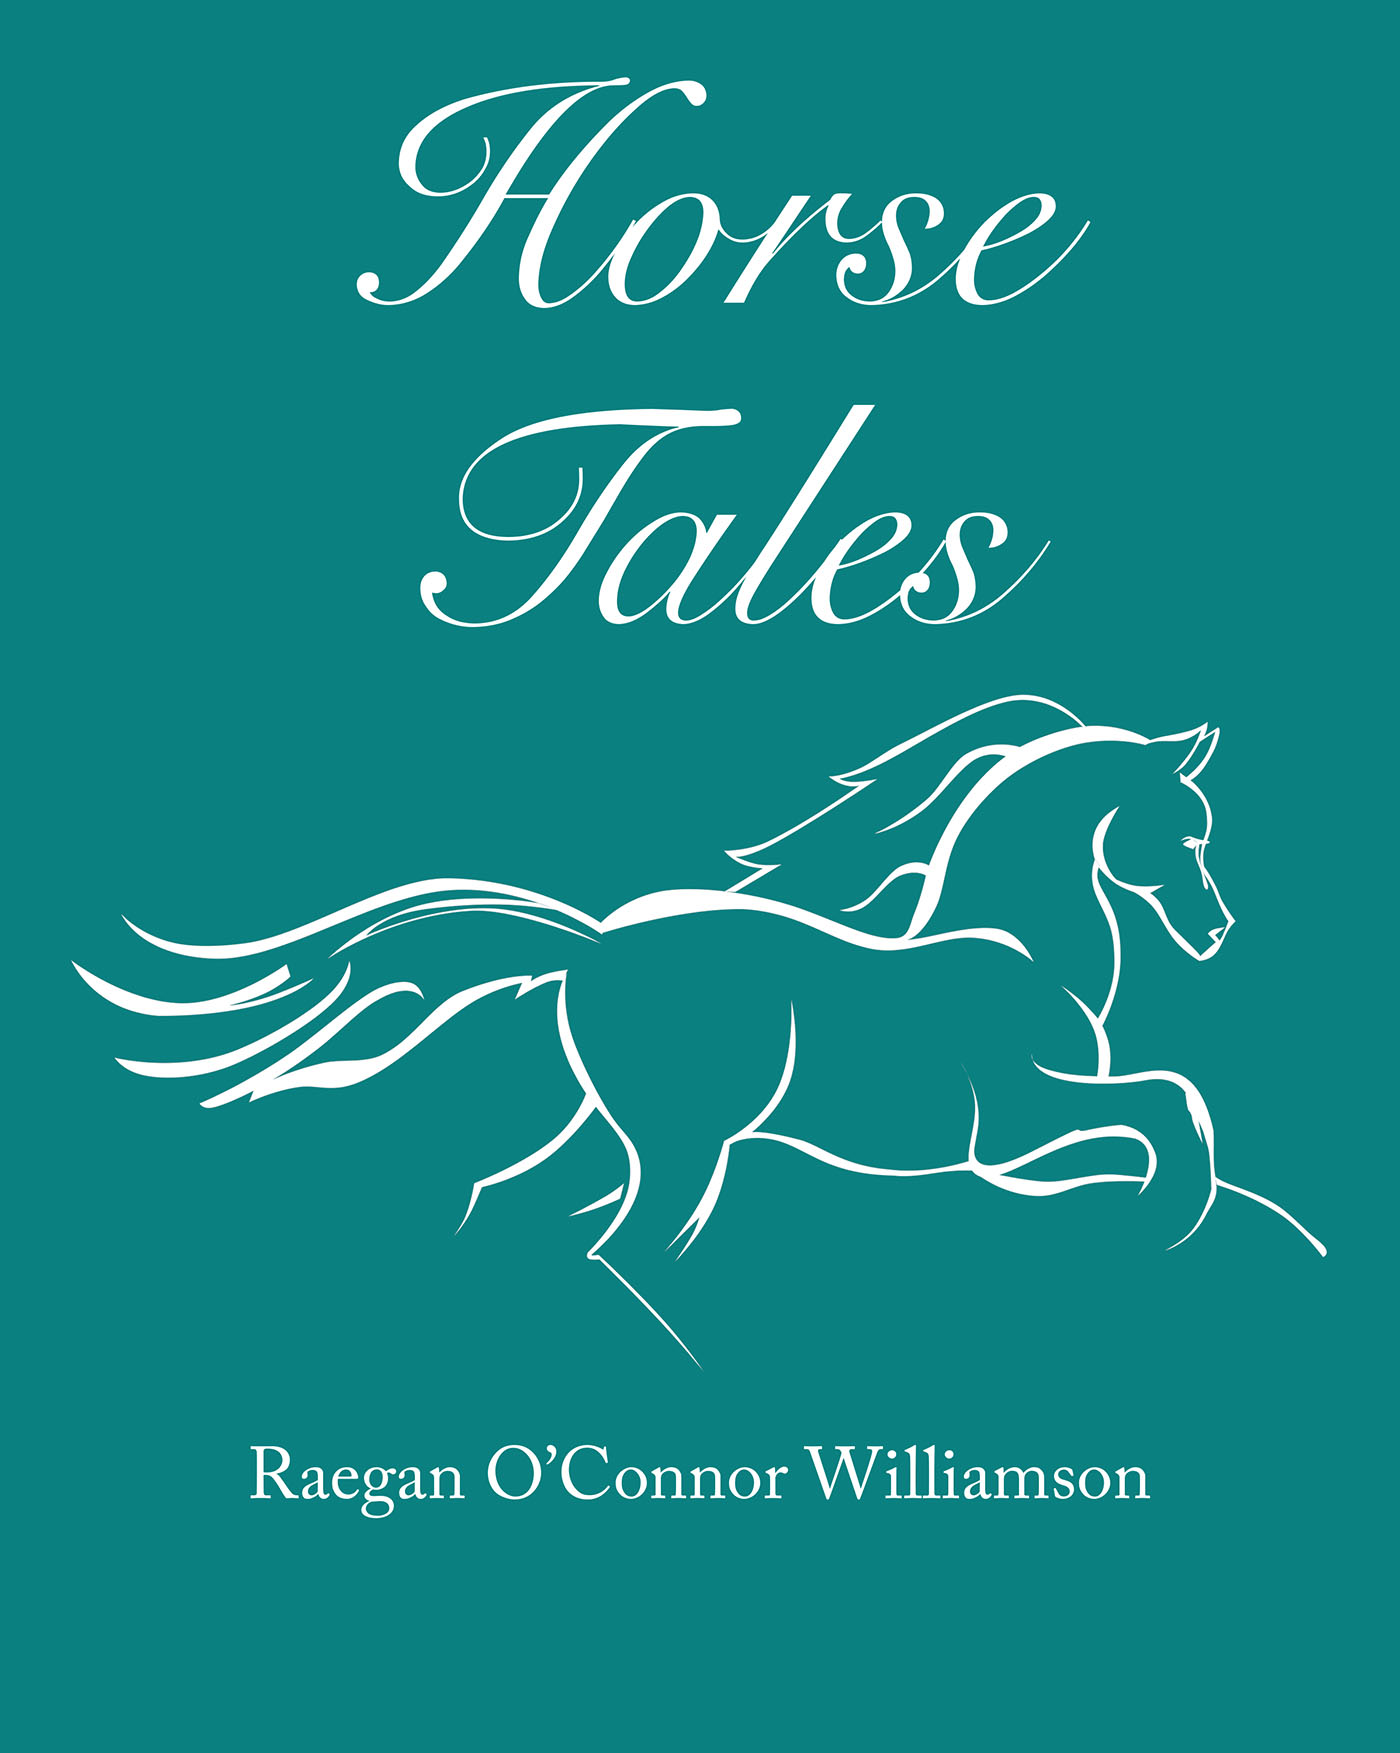 Raegan O'Connor Williamson’s Newly Released “Horse Tales” is an Uplifting Collection of Four Short Stories That Each Hold a Powerful Life Lesson